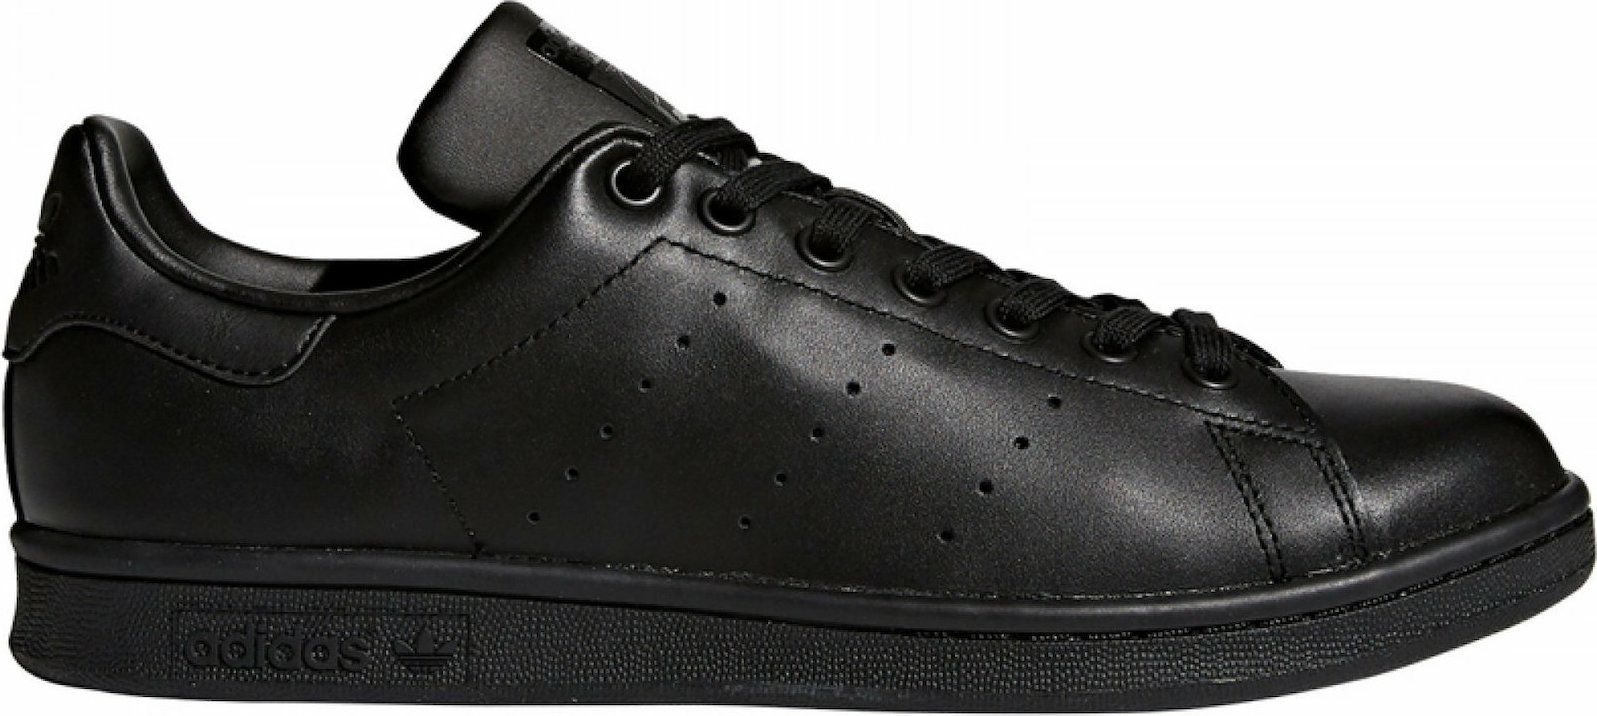 stan smith shoes 7.5